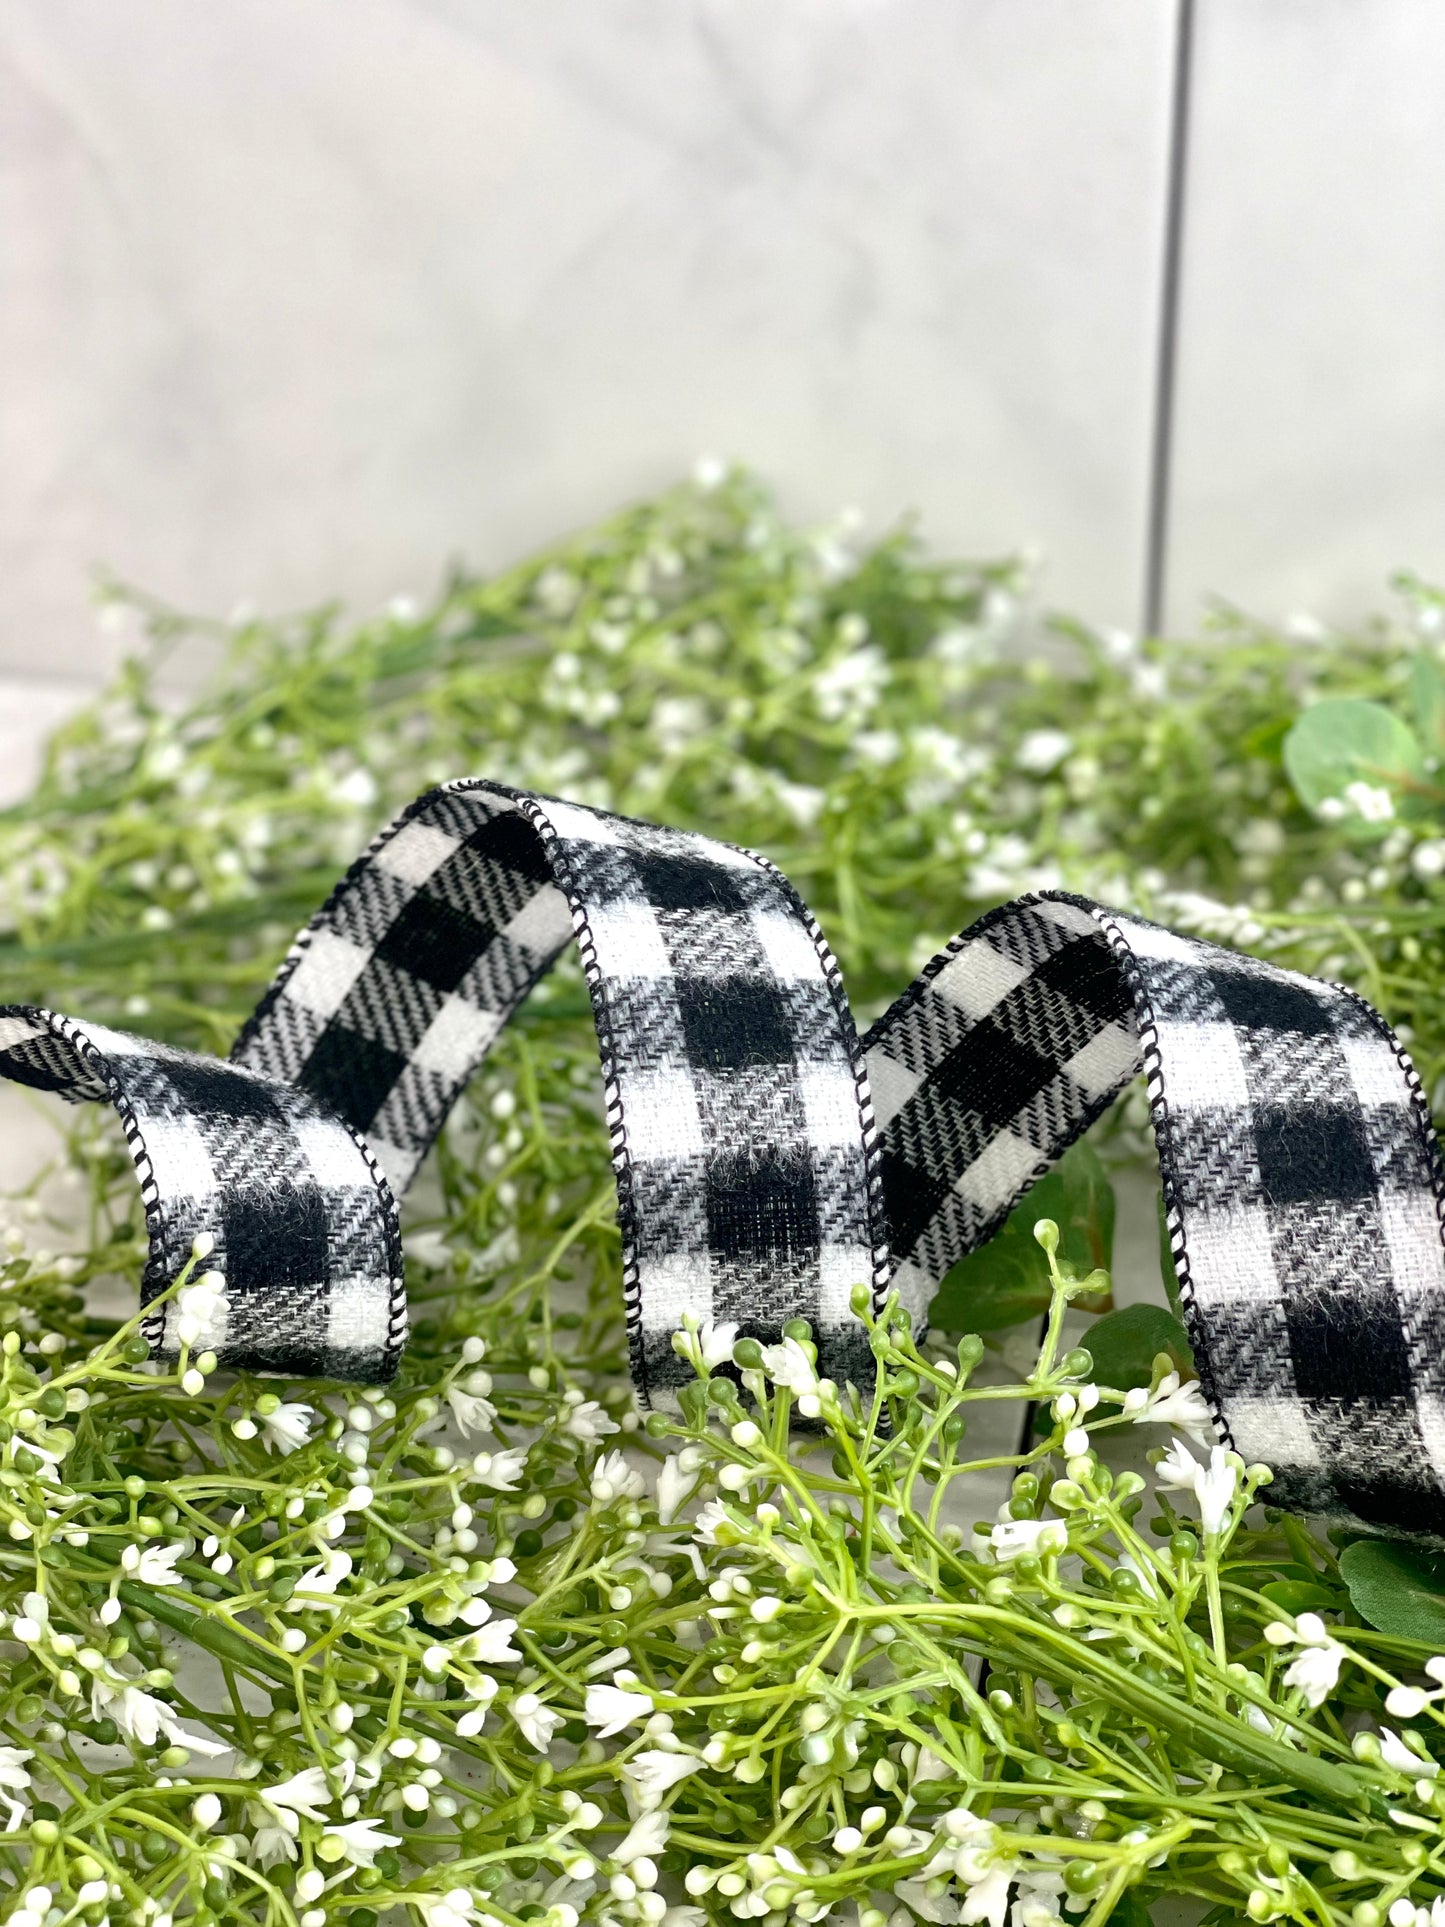 Black And White Brushed Square Plaid Ribbon 1.5 Inch 10 Yard Roll